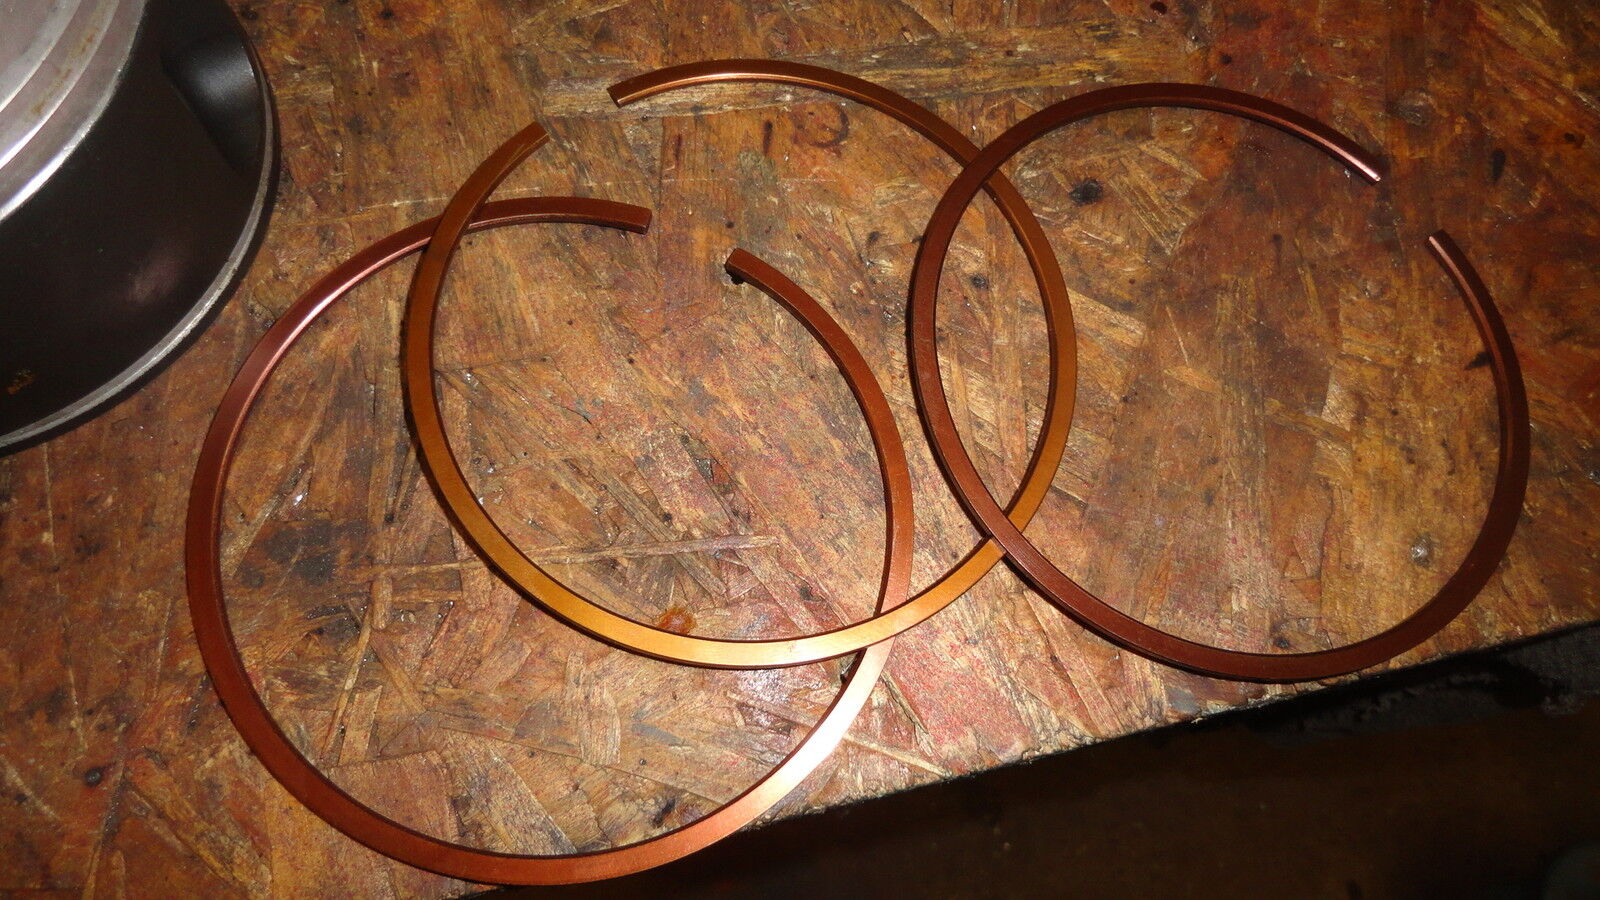 NEW OEM Piston Oil scraper (fourth) rings for PZL AI-14 (1 SET OF 9 PIECES)